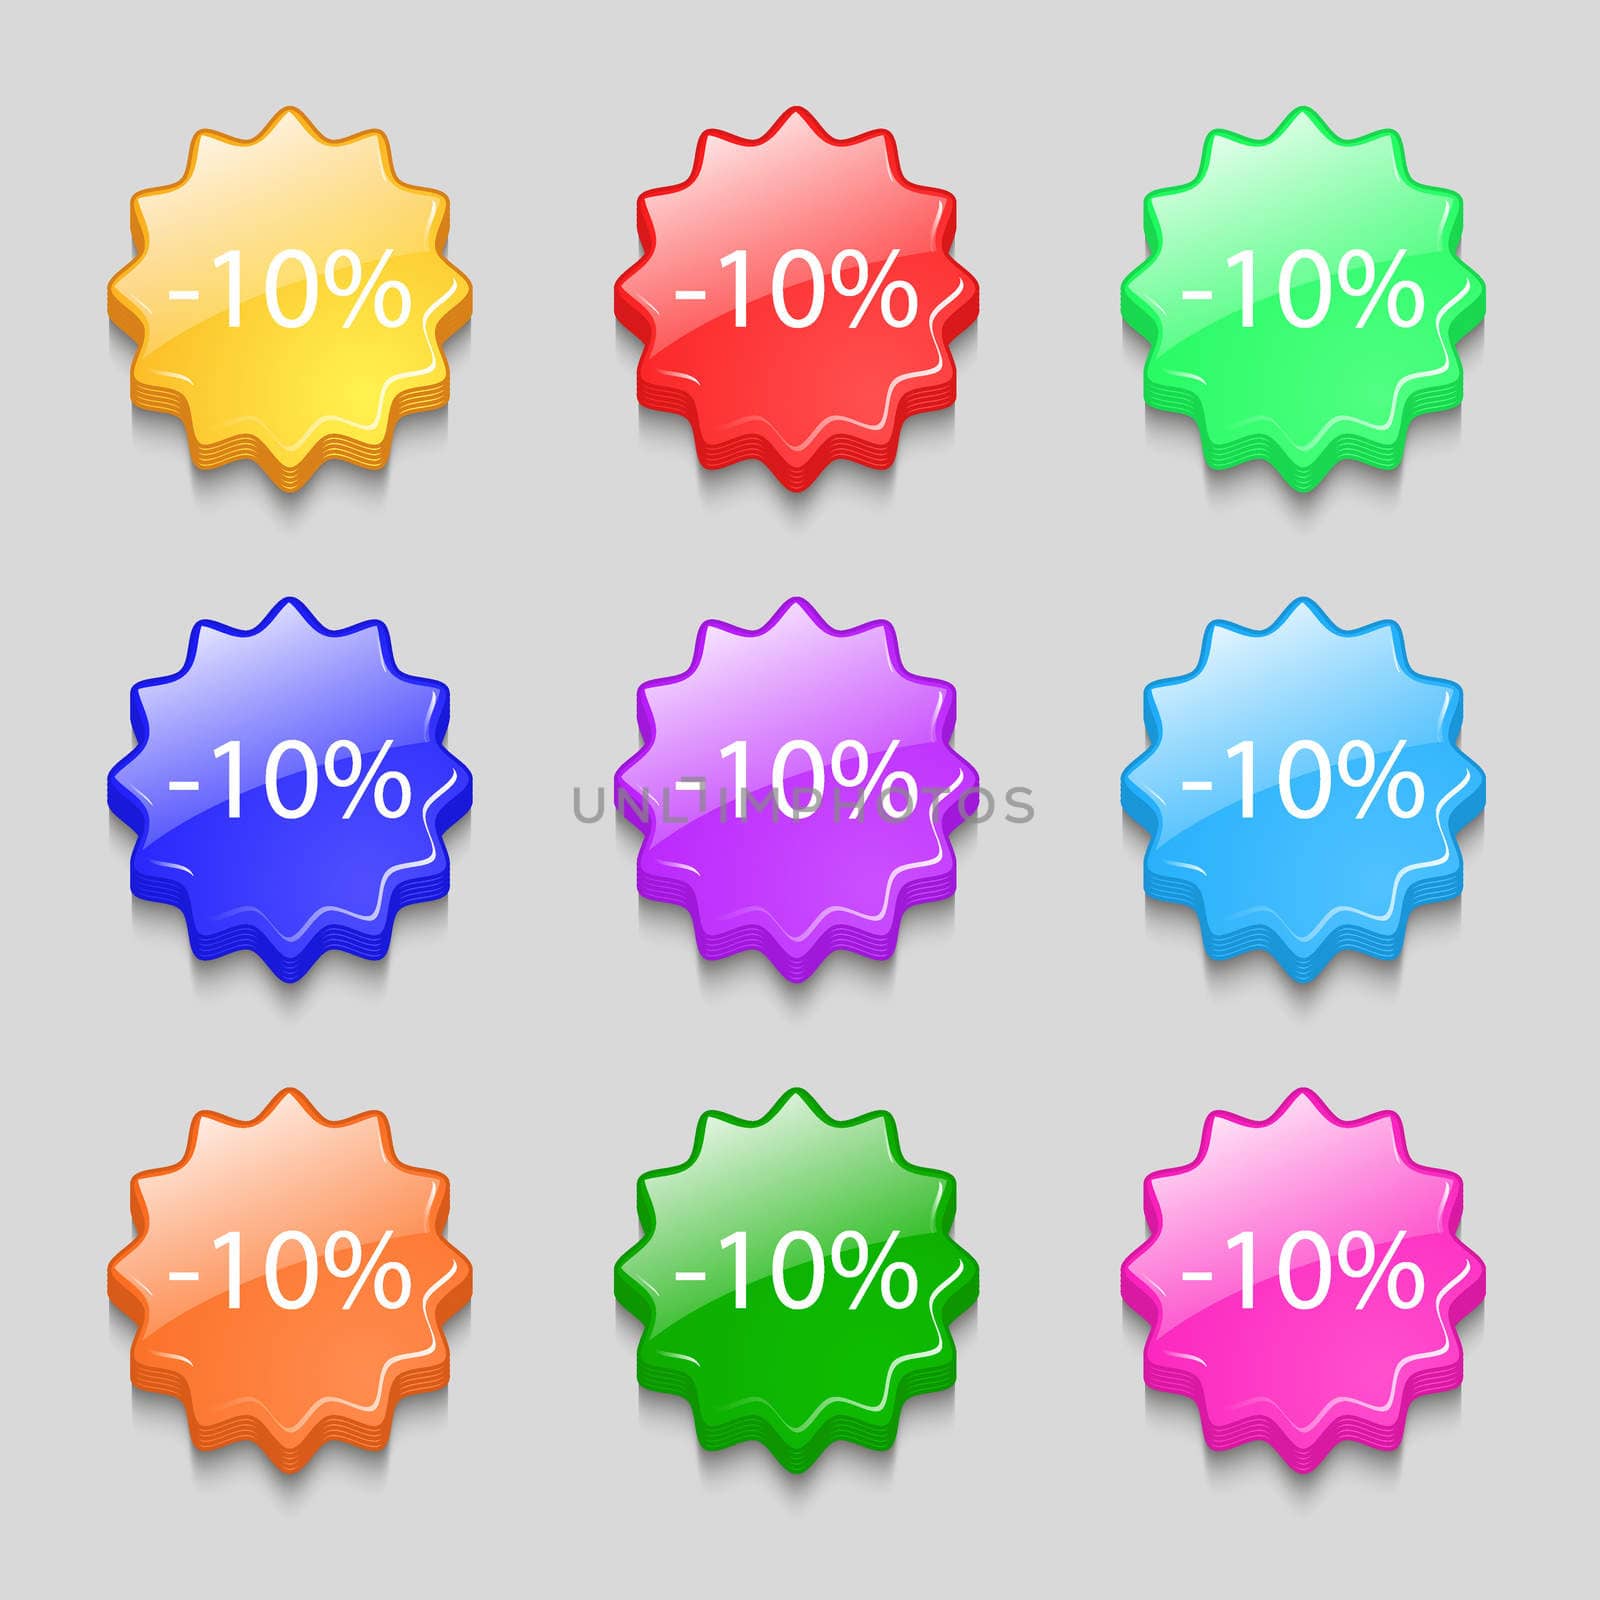 10 percent discount sign icon. Sale symbol. Special offer label. Symbols on nine wavy colourful buttons. illustration